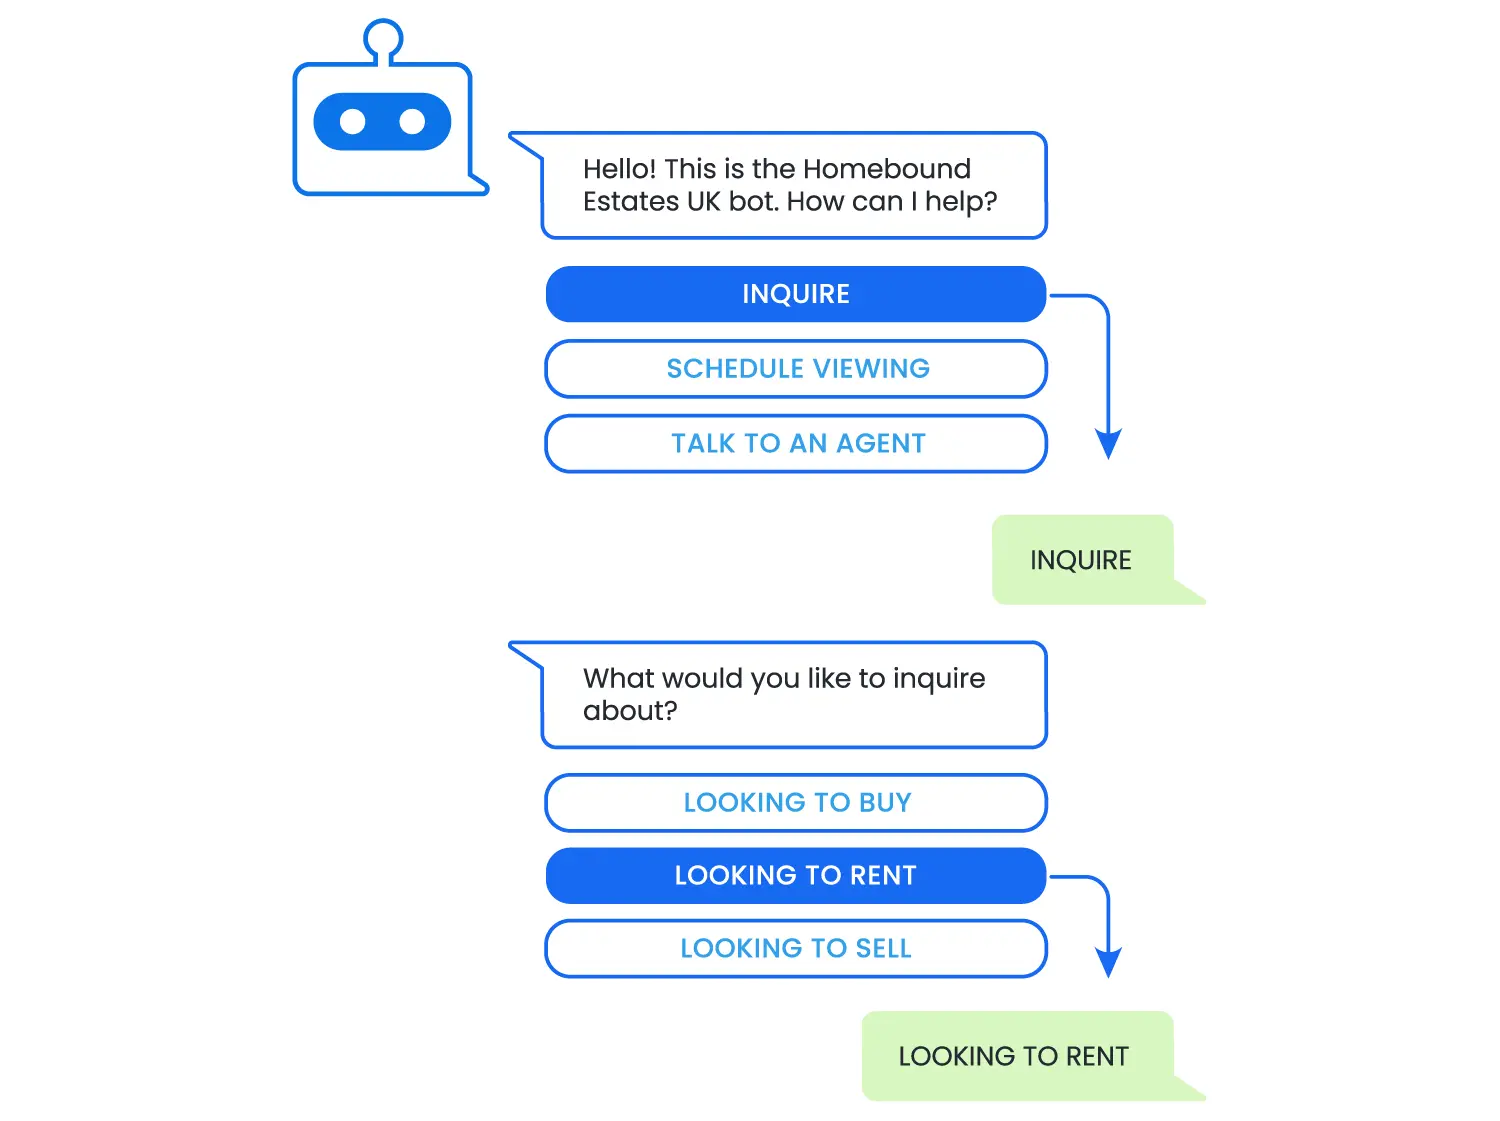 A sample WhatsApp chatbot experience with an interactive message flow streamlining customer service for an Estate Agency.